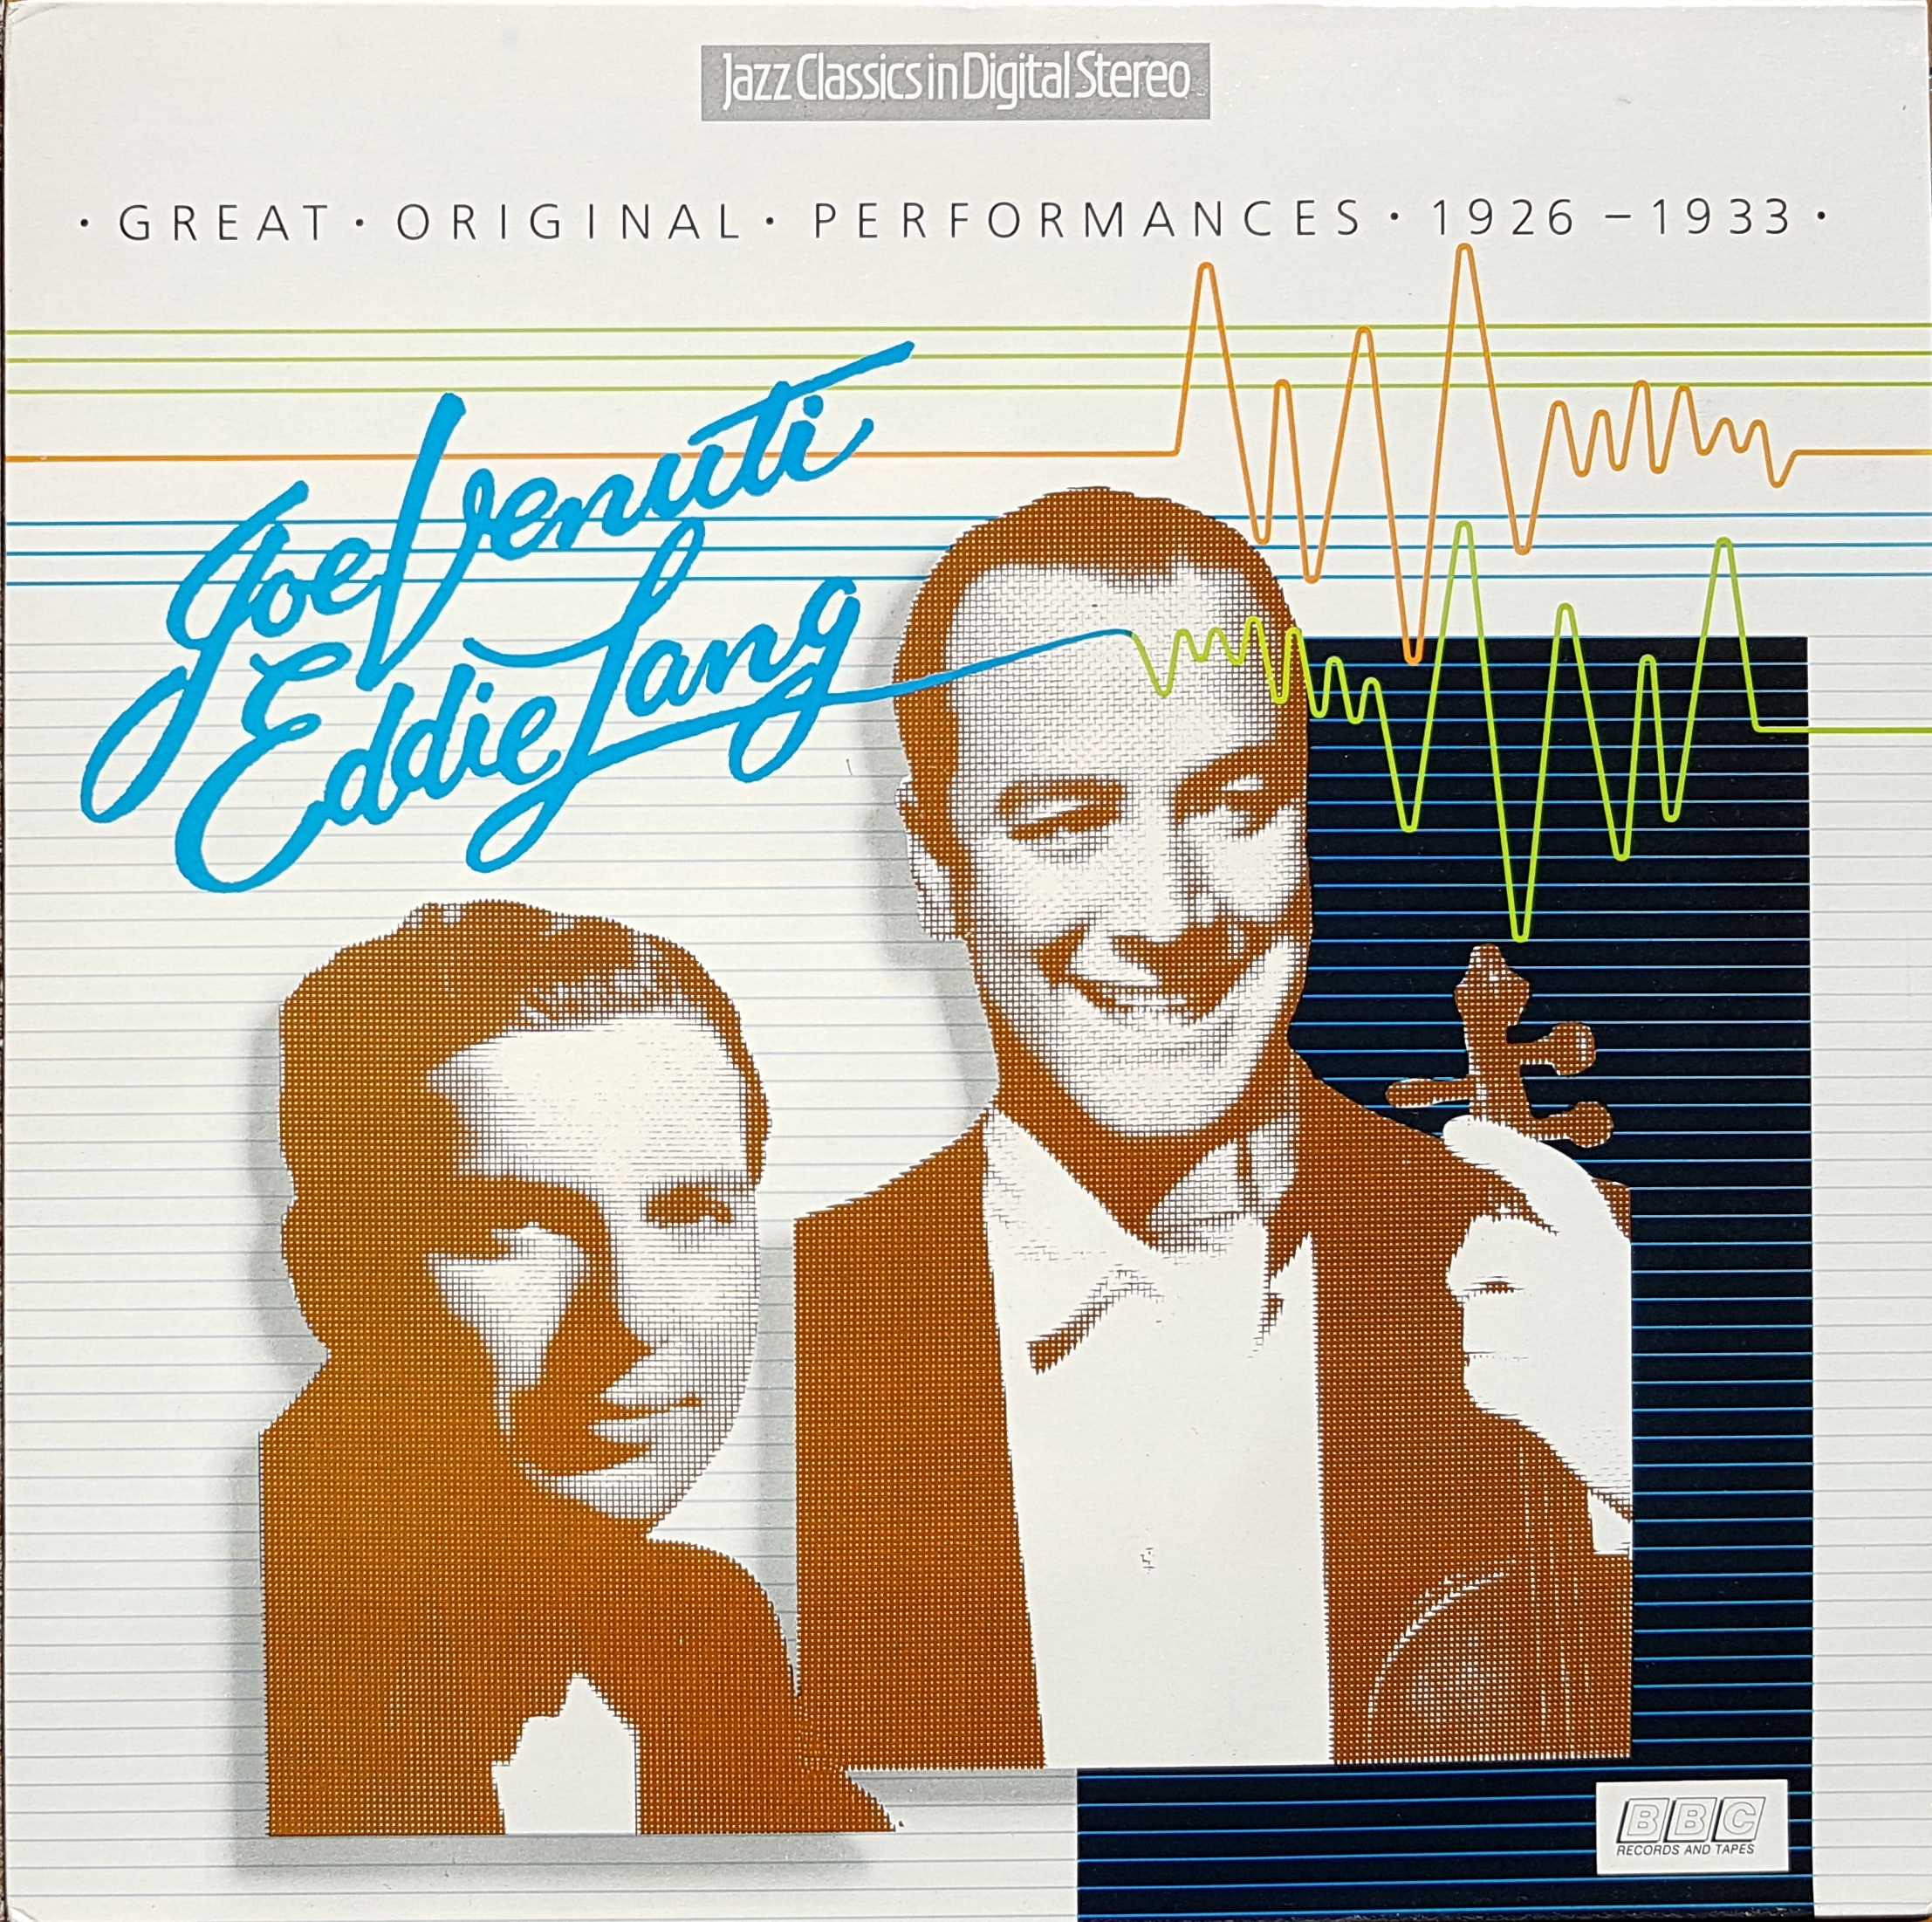 Picture of REB 644 Jazz classics - Joe Venuti and Eddie Lang by artist Joe Venuti / Eddie Lang from the BBC albums - Records and Tapes library